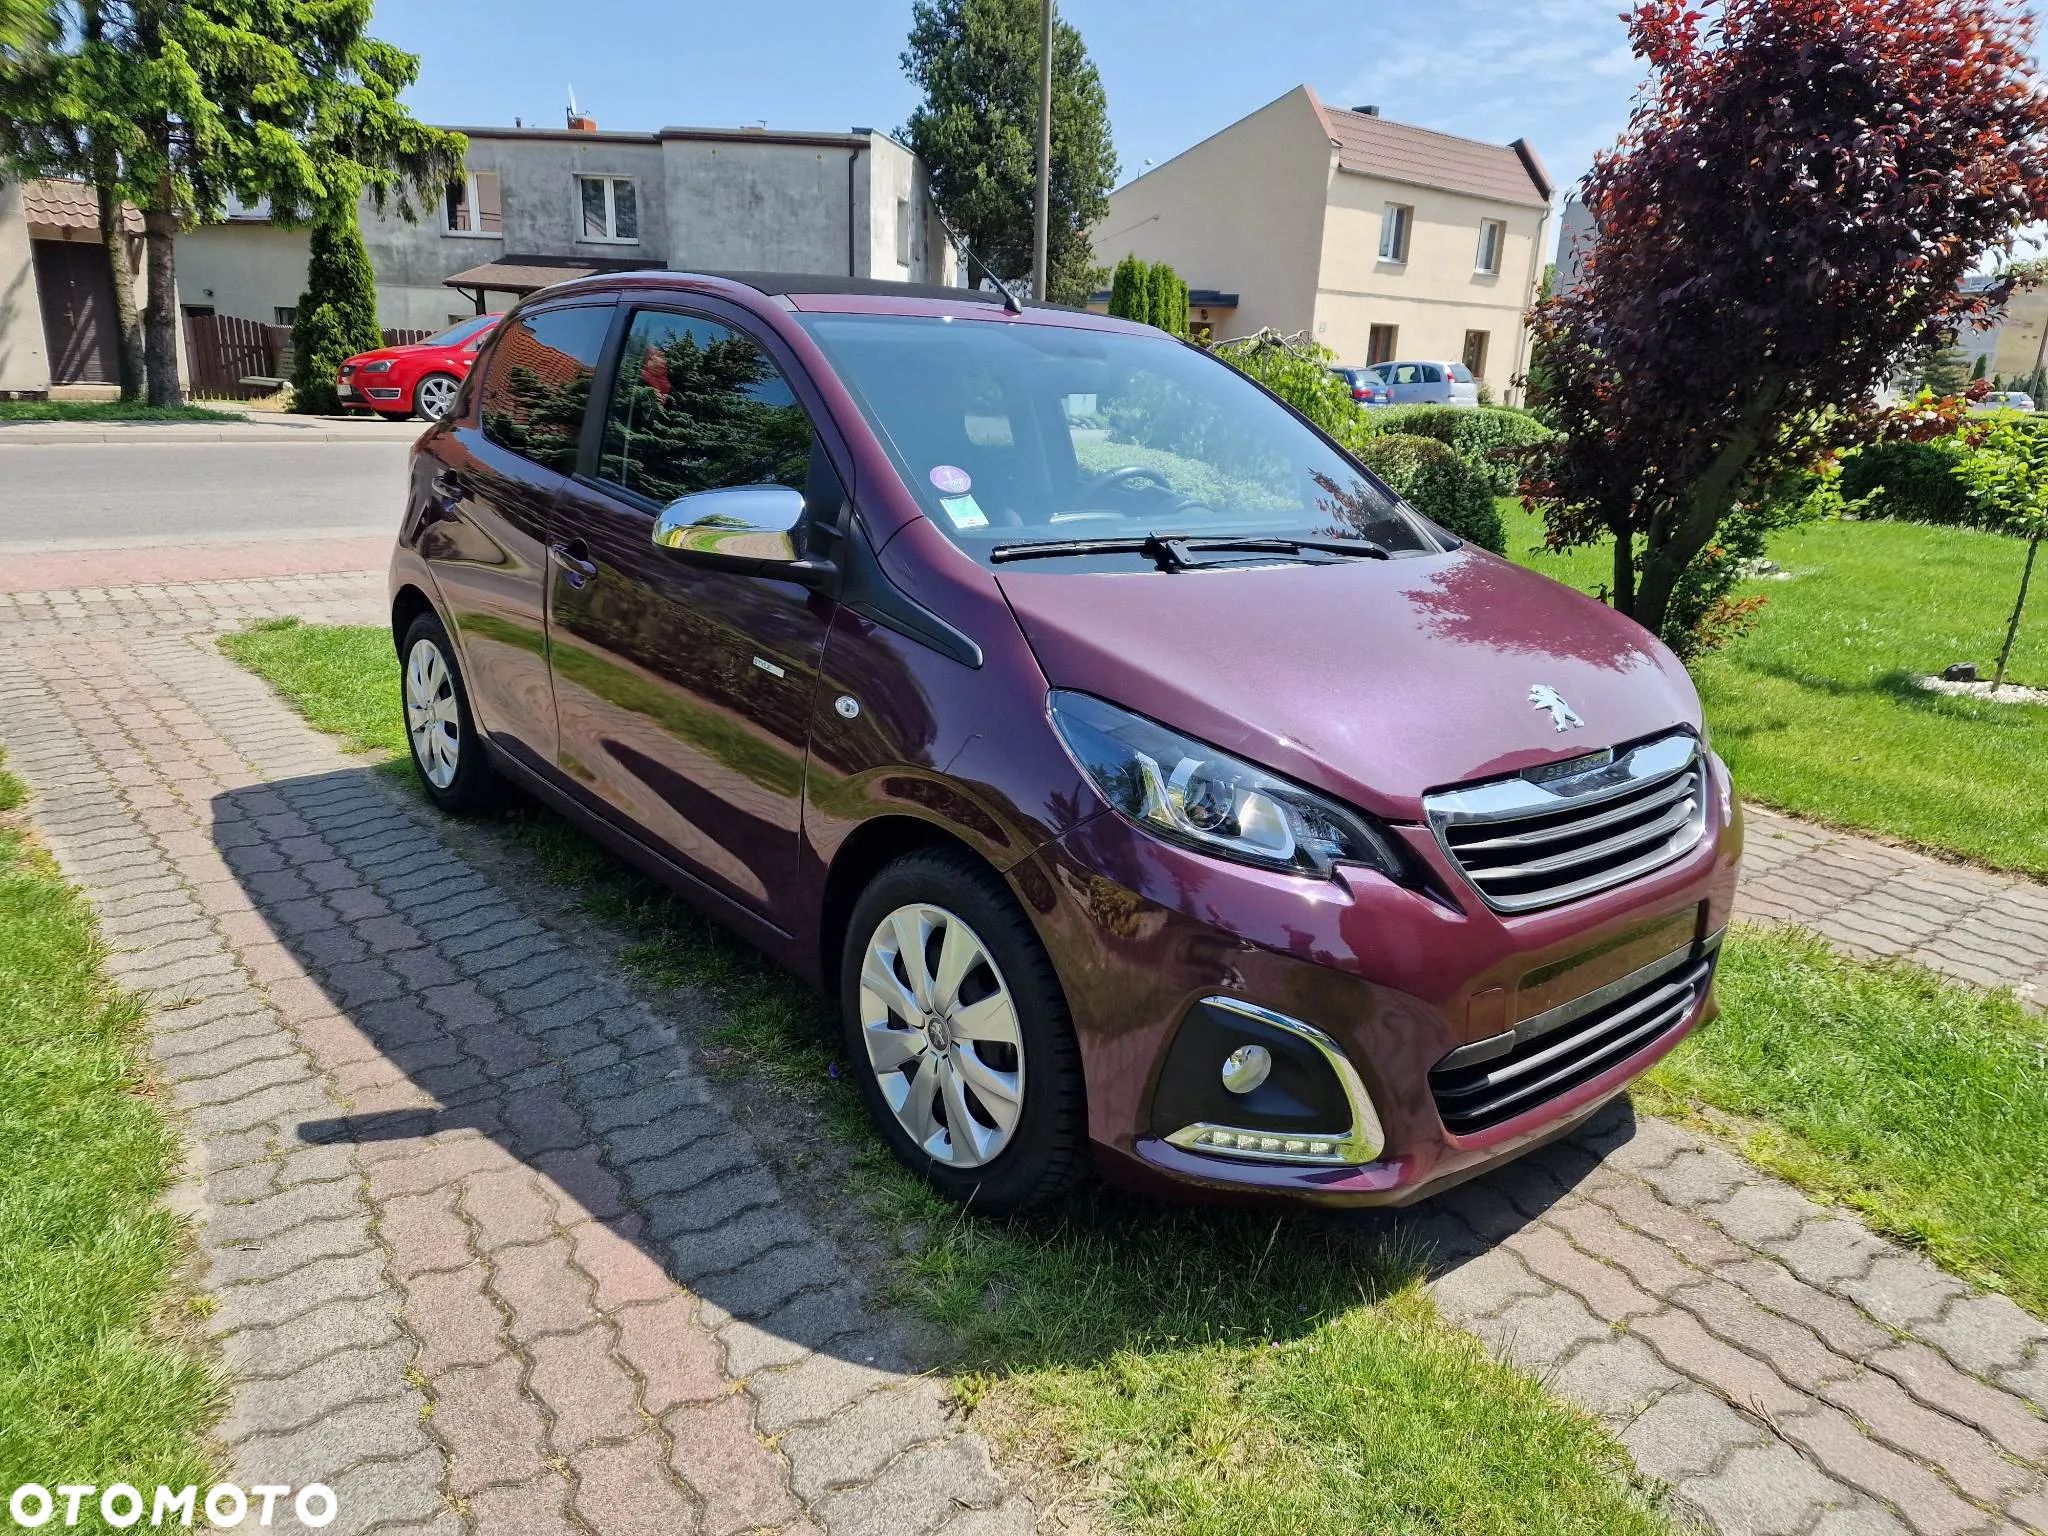 Peugeot 108 VTI 72 Collection - 1